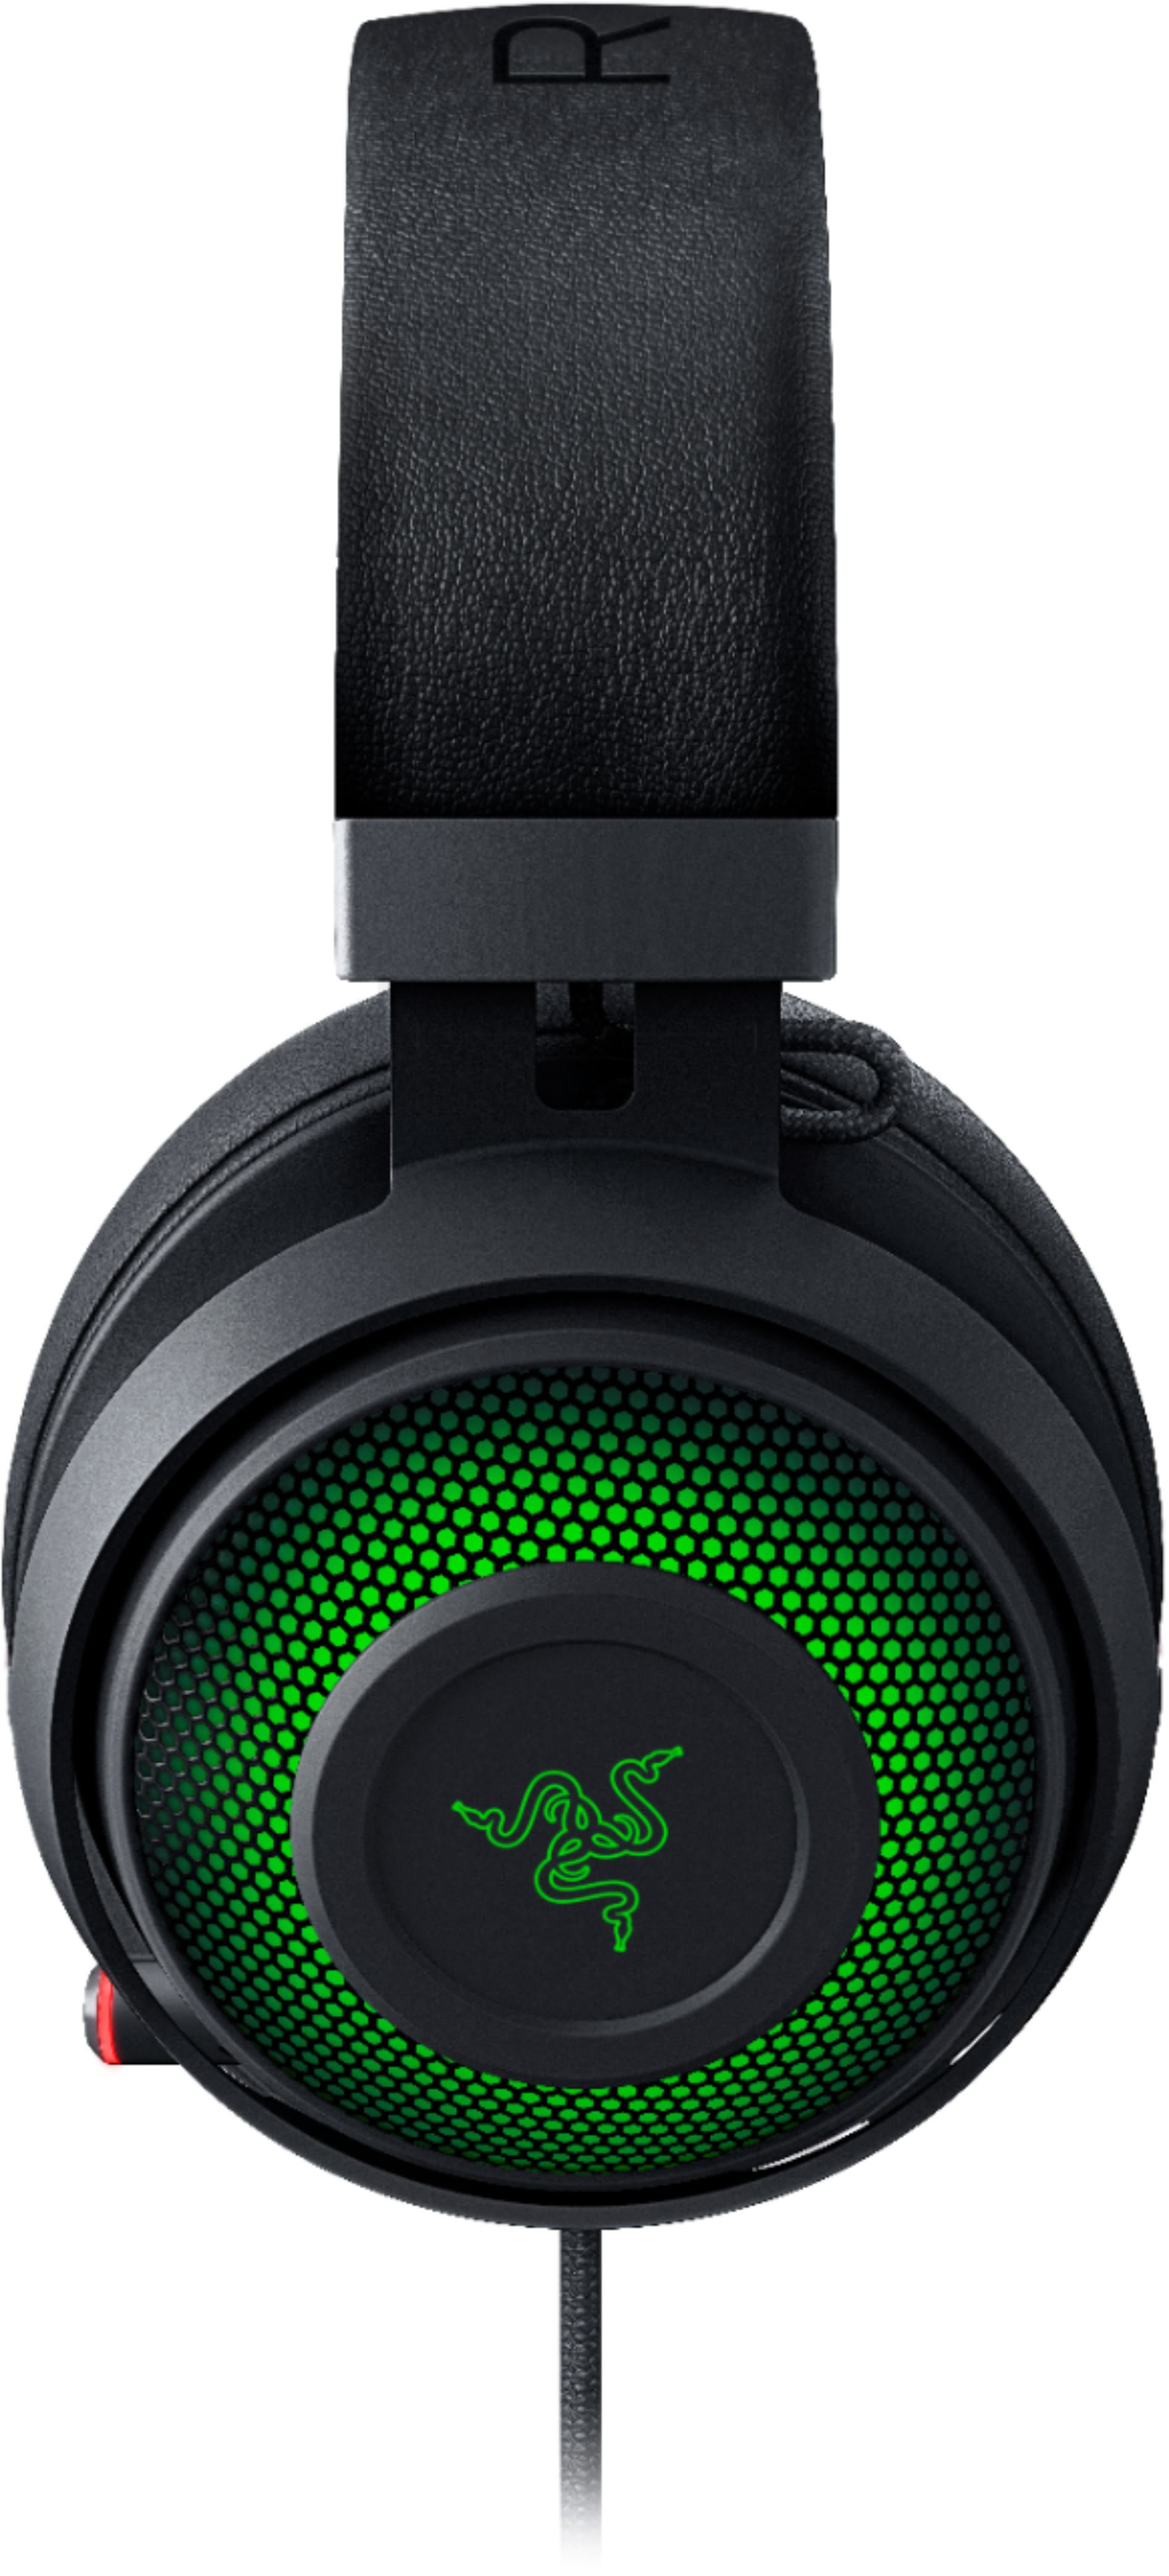  Razer Kraken Ultimate – USB Gaming Headset (Gaming Headphones  for PC, PS4 and Switch Dock with Surround Sound, ANC Microphone and RGB  Chroma) : Video Games